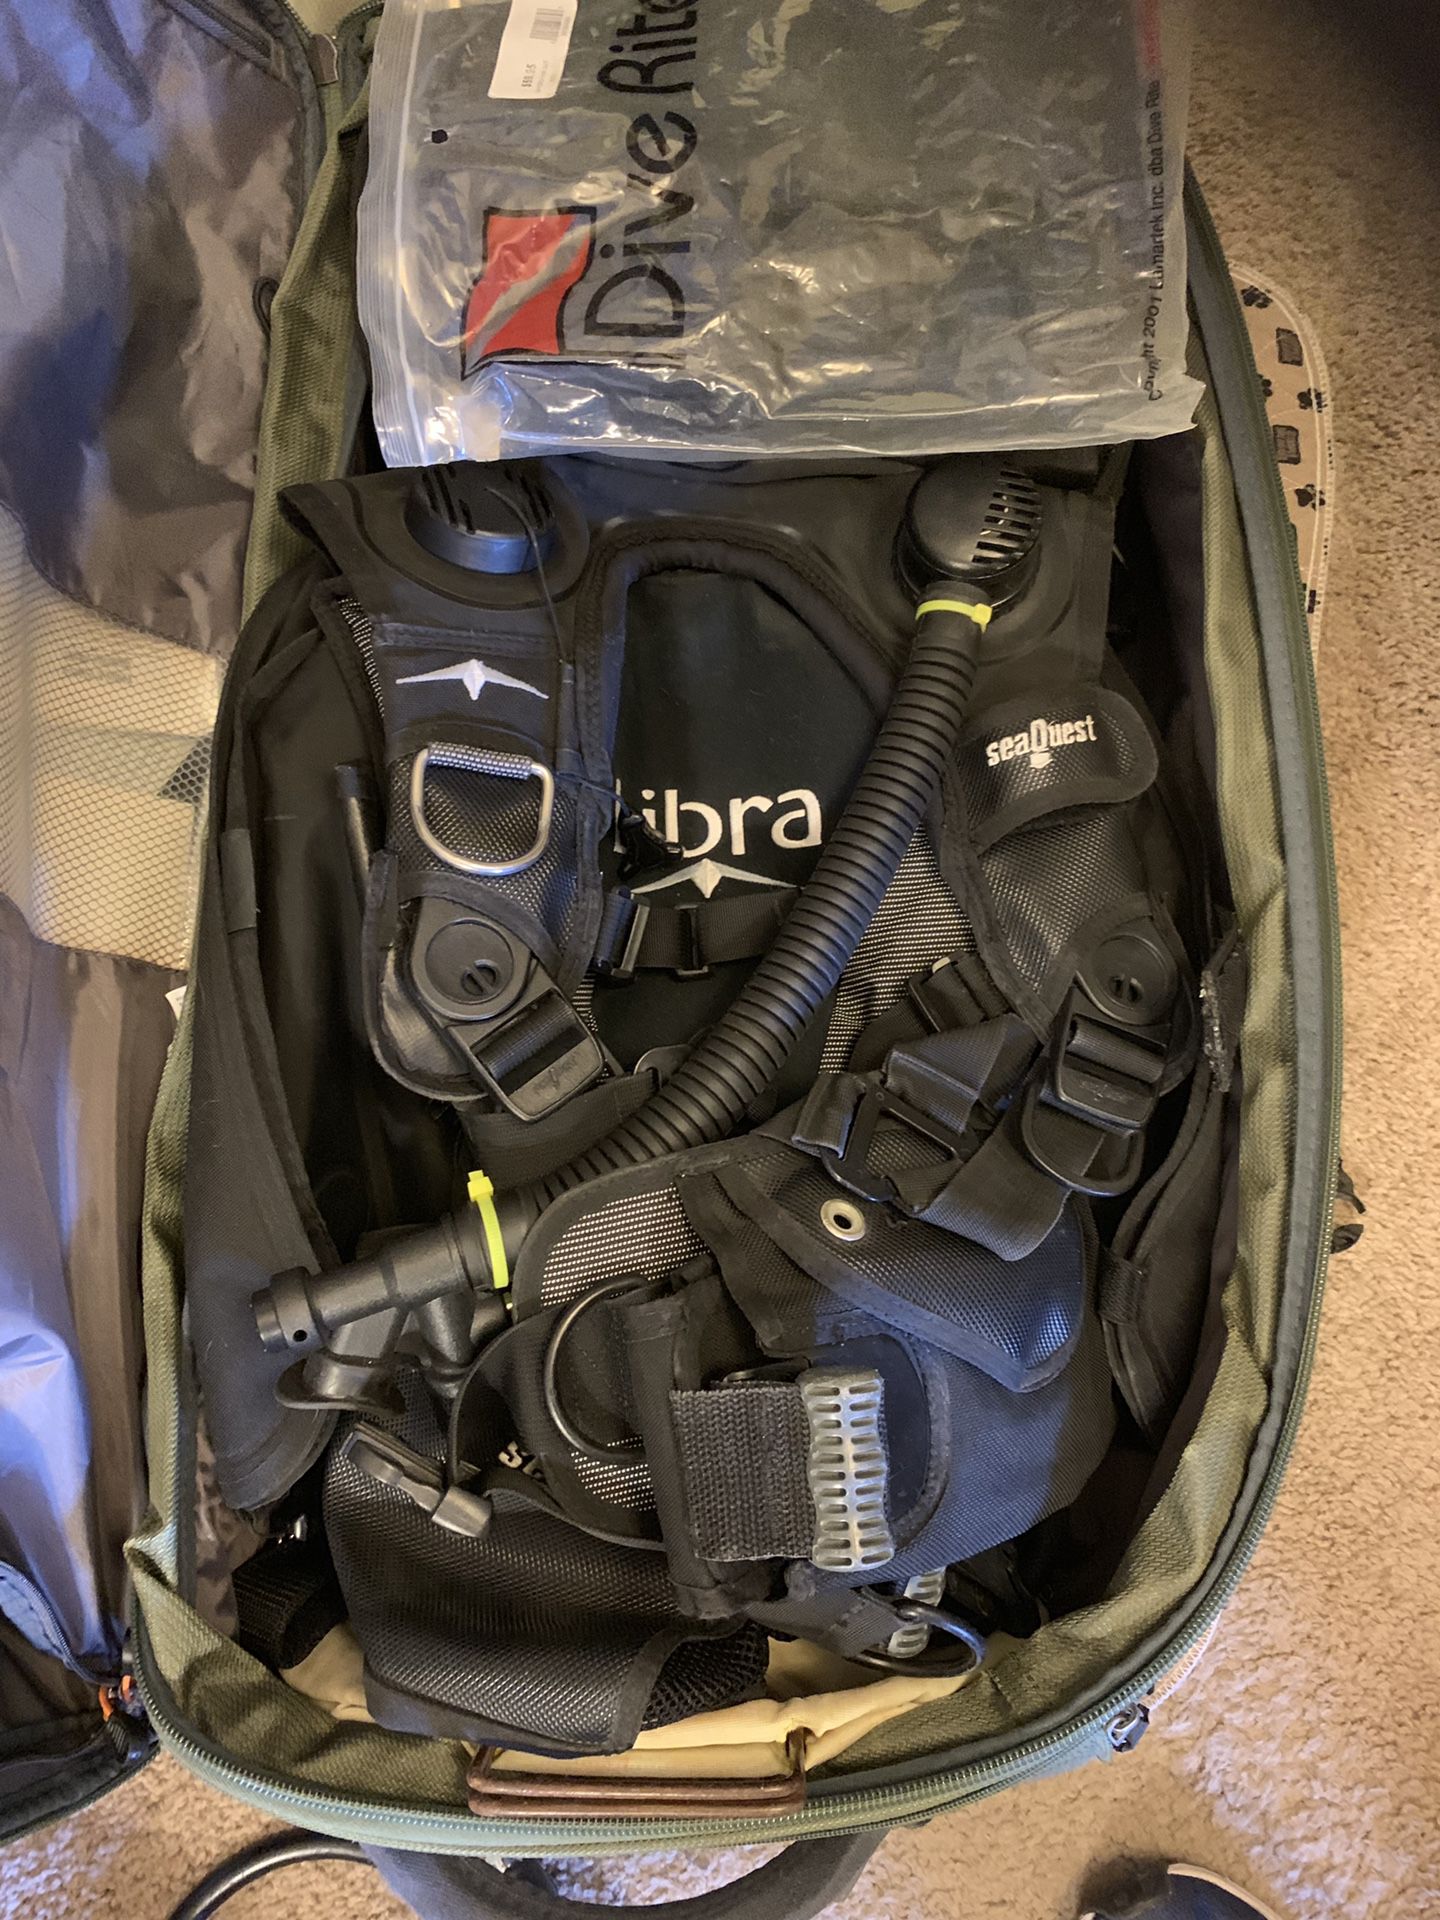 Small Scuba pack with BCD, accessories, dive computer, and full bag